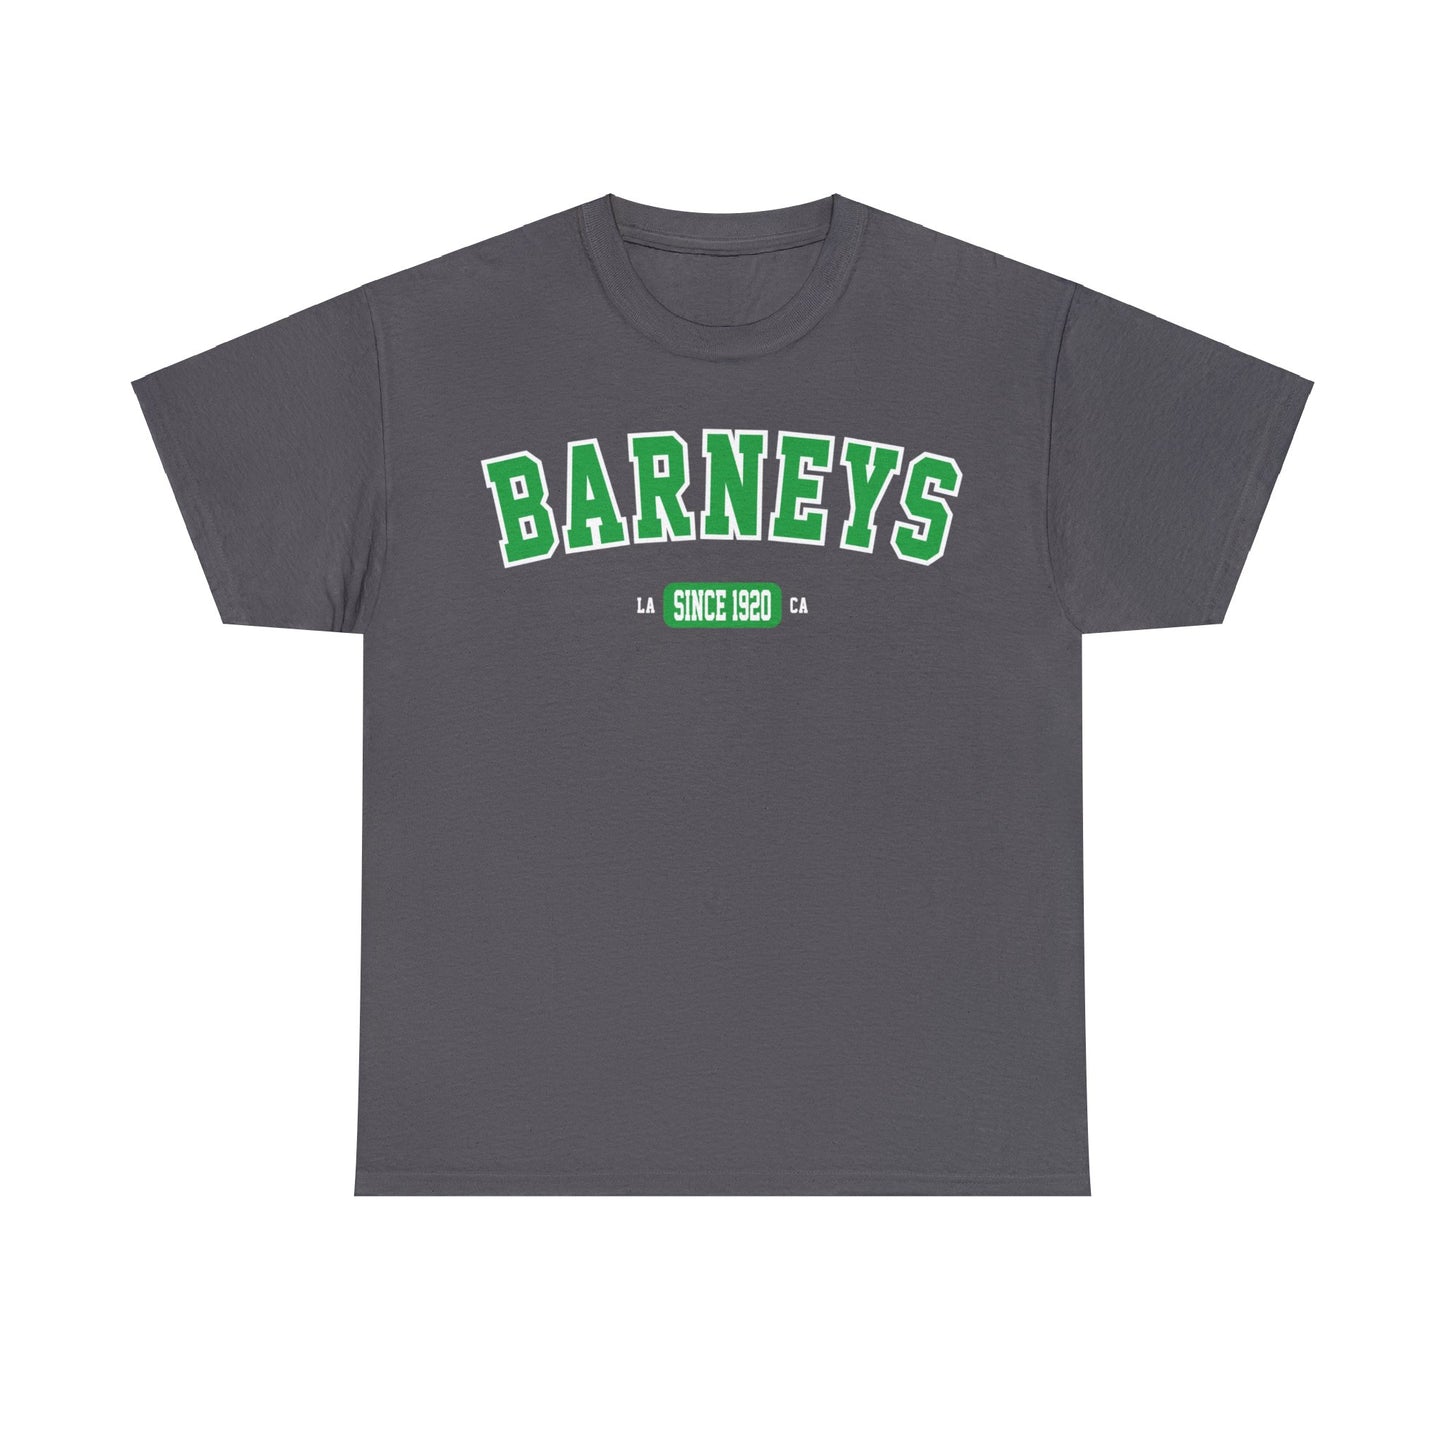 Vintage Collegiate | BARNEY'S BEANERY - Women's Graphic Tee | Charcoal Gildan 5000 T-Shirt, Green Graphic, Front View Flat Lay